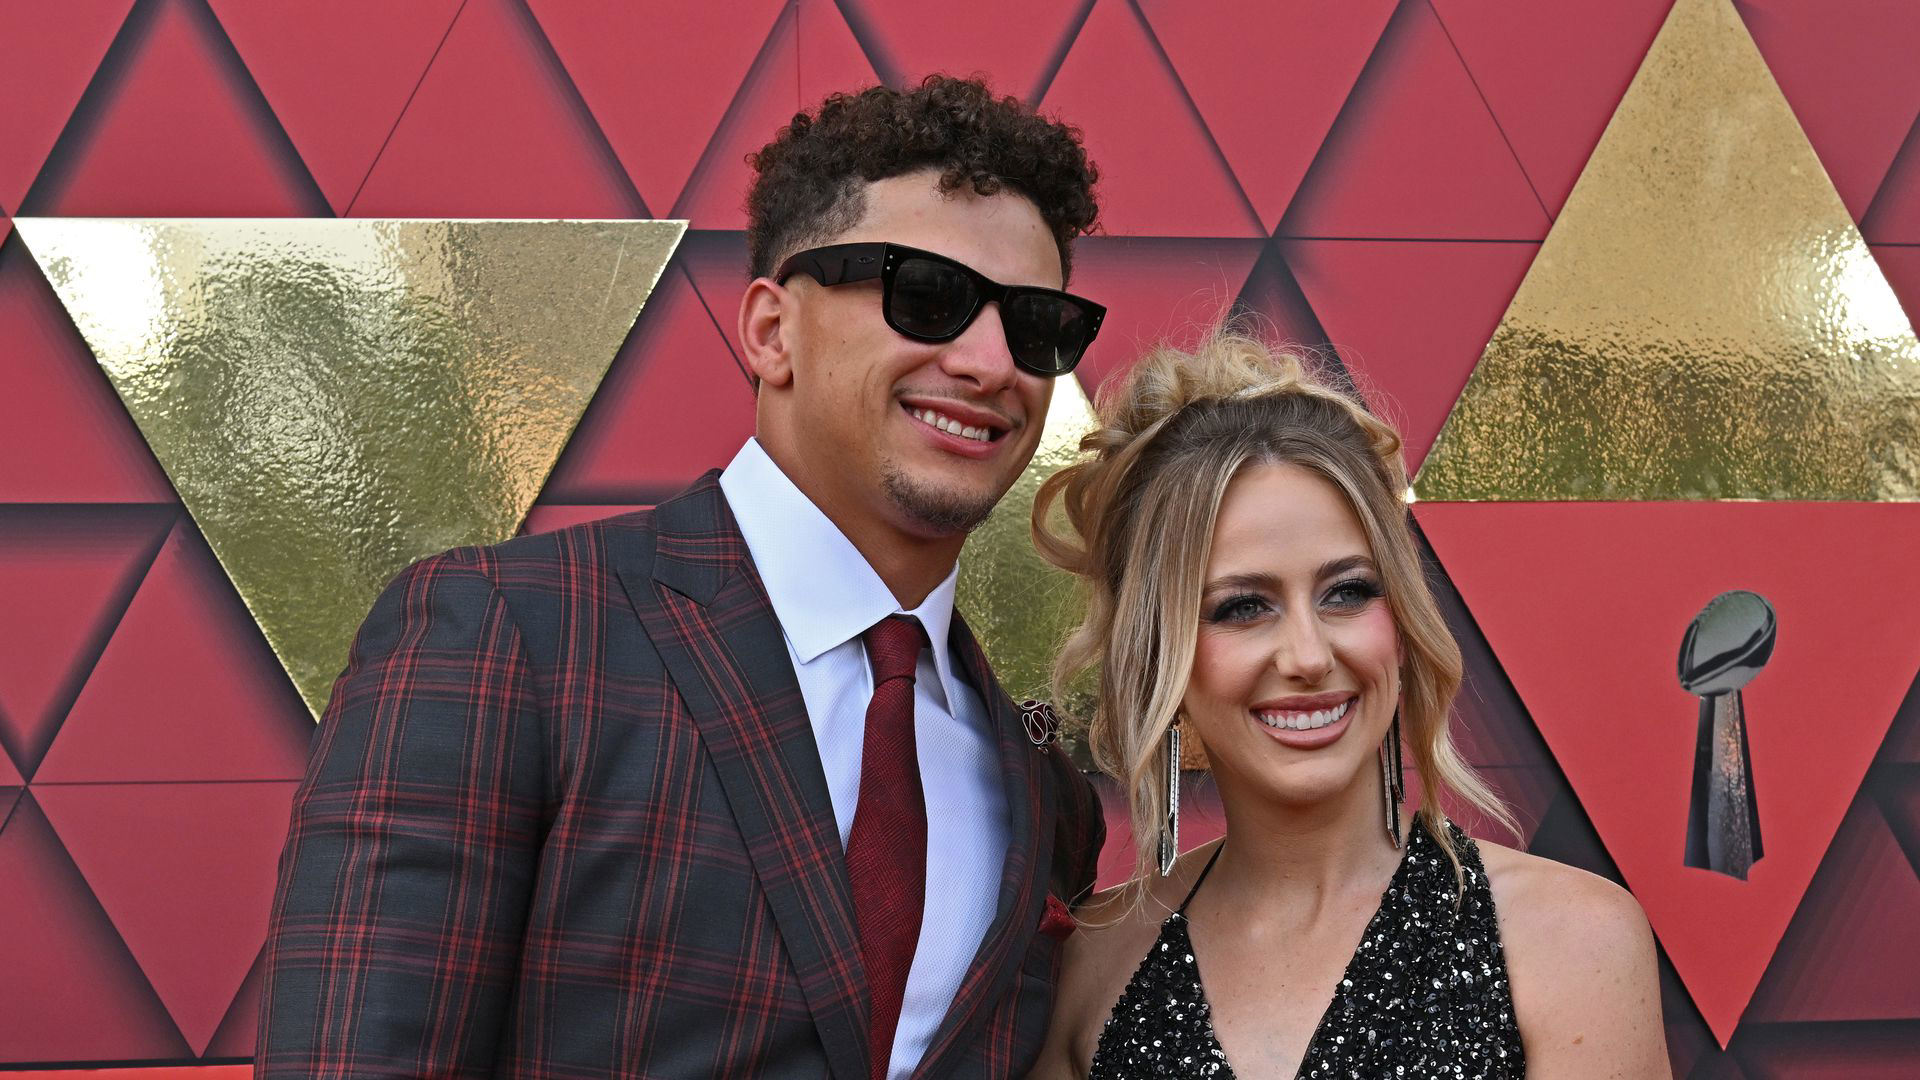 Patrick Mahomes wins ESPY for ‘Best Male Athlete’